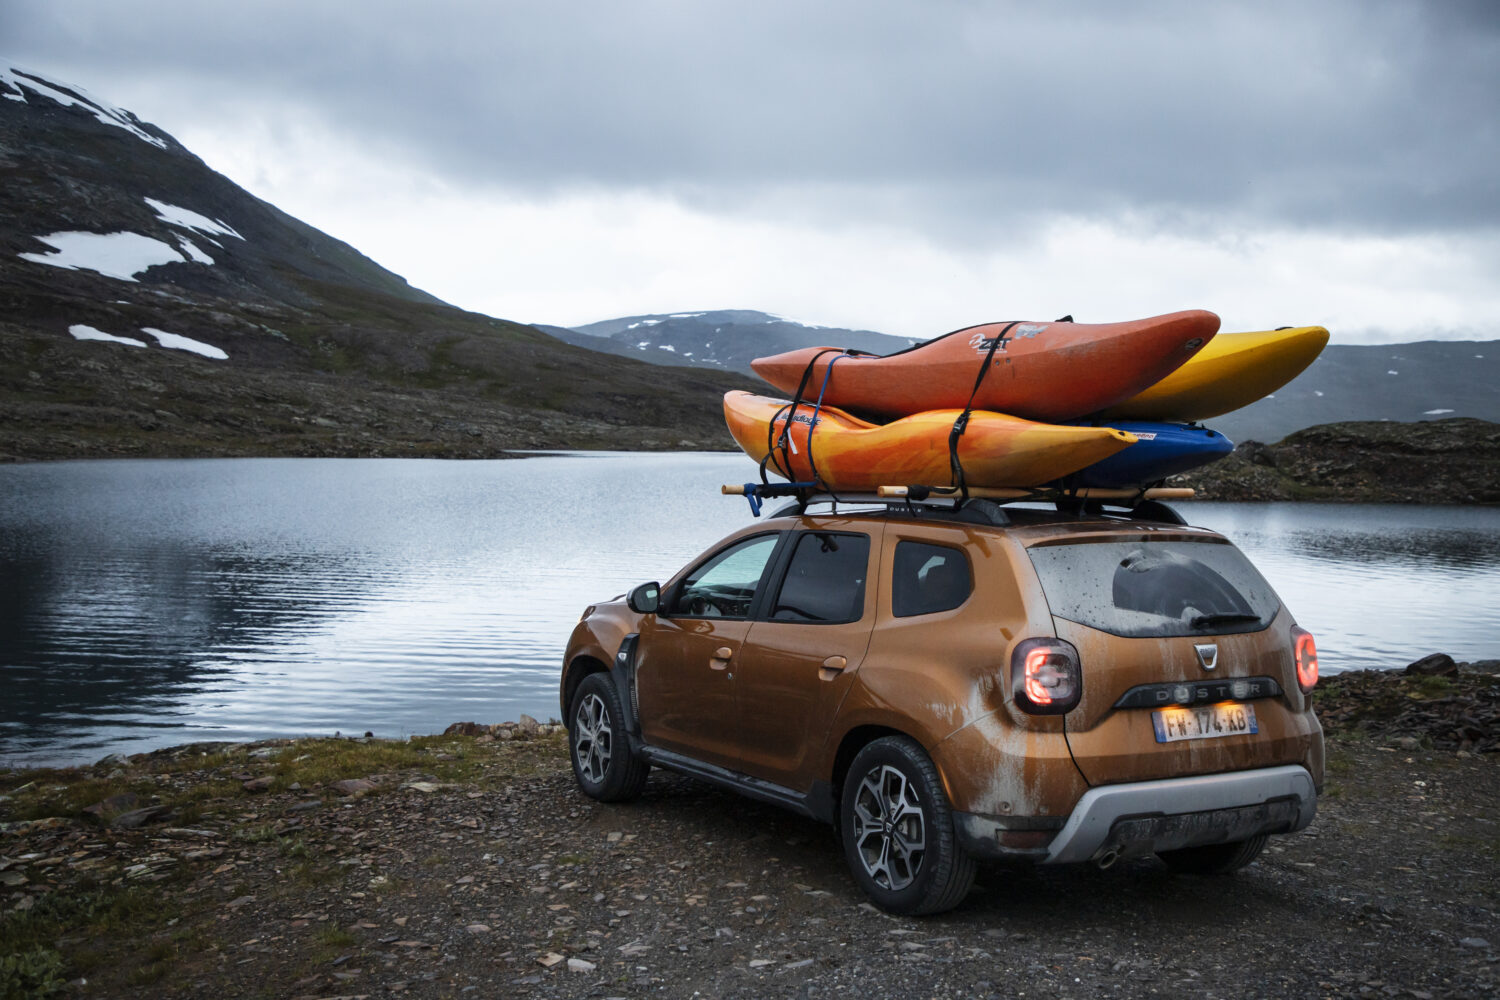 2021 - Story -  Kayaking through Lapland, a Duster adventure